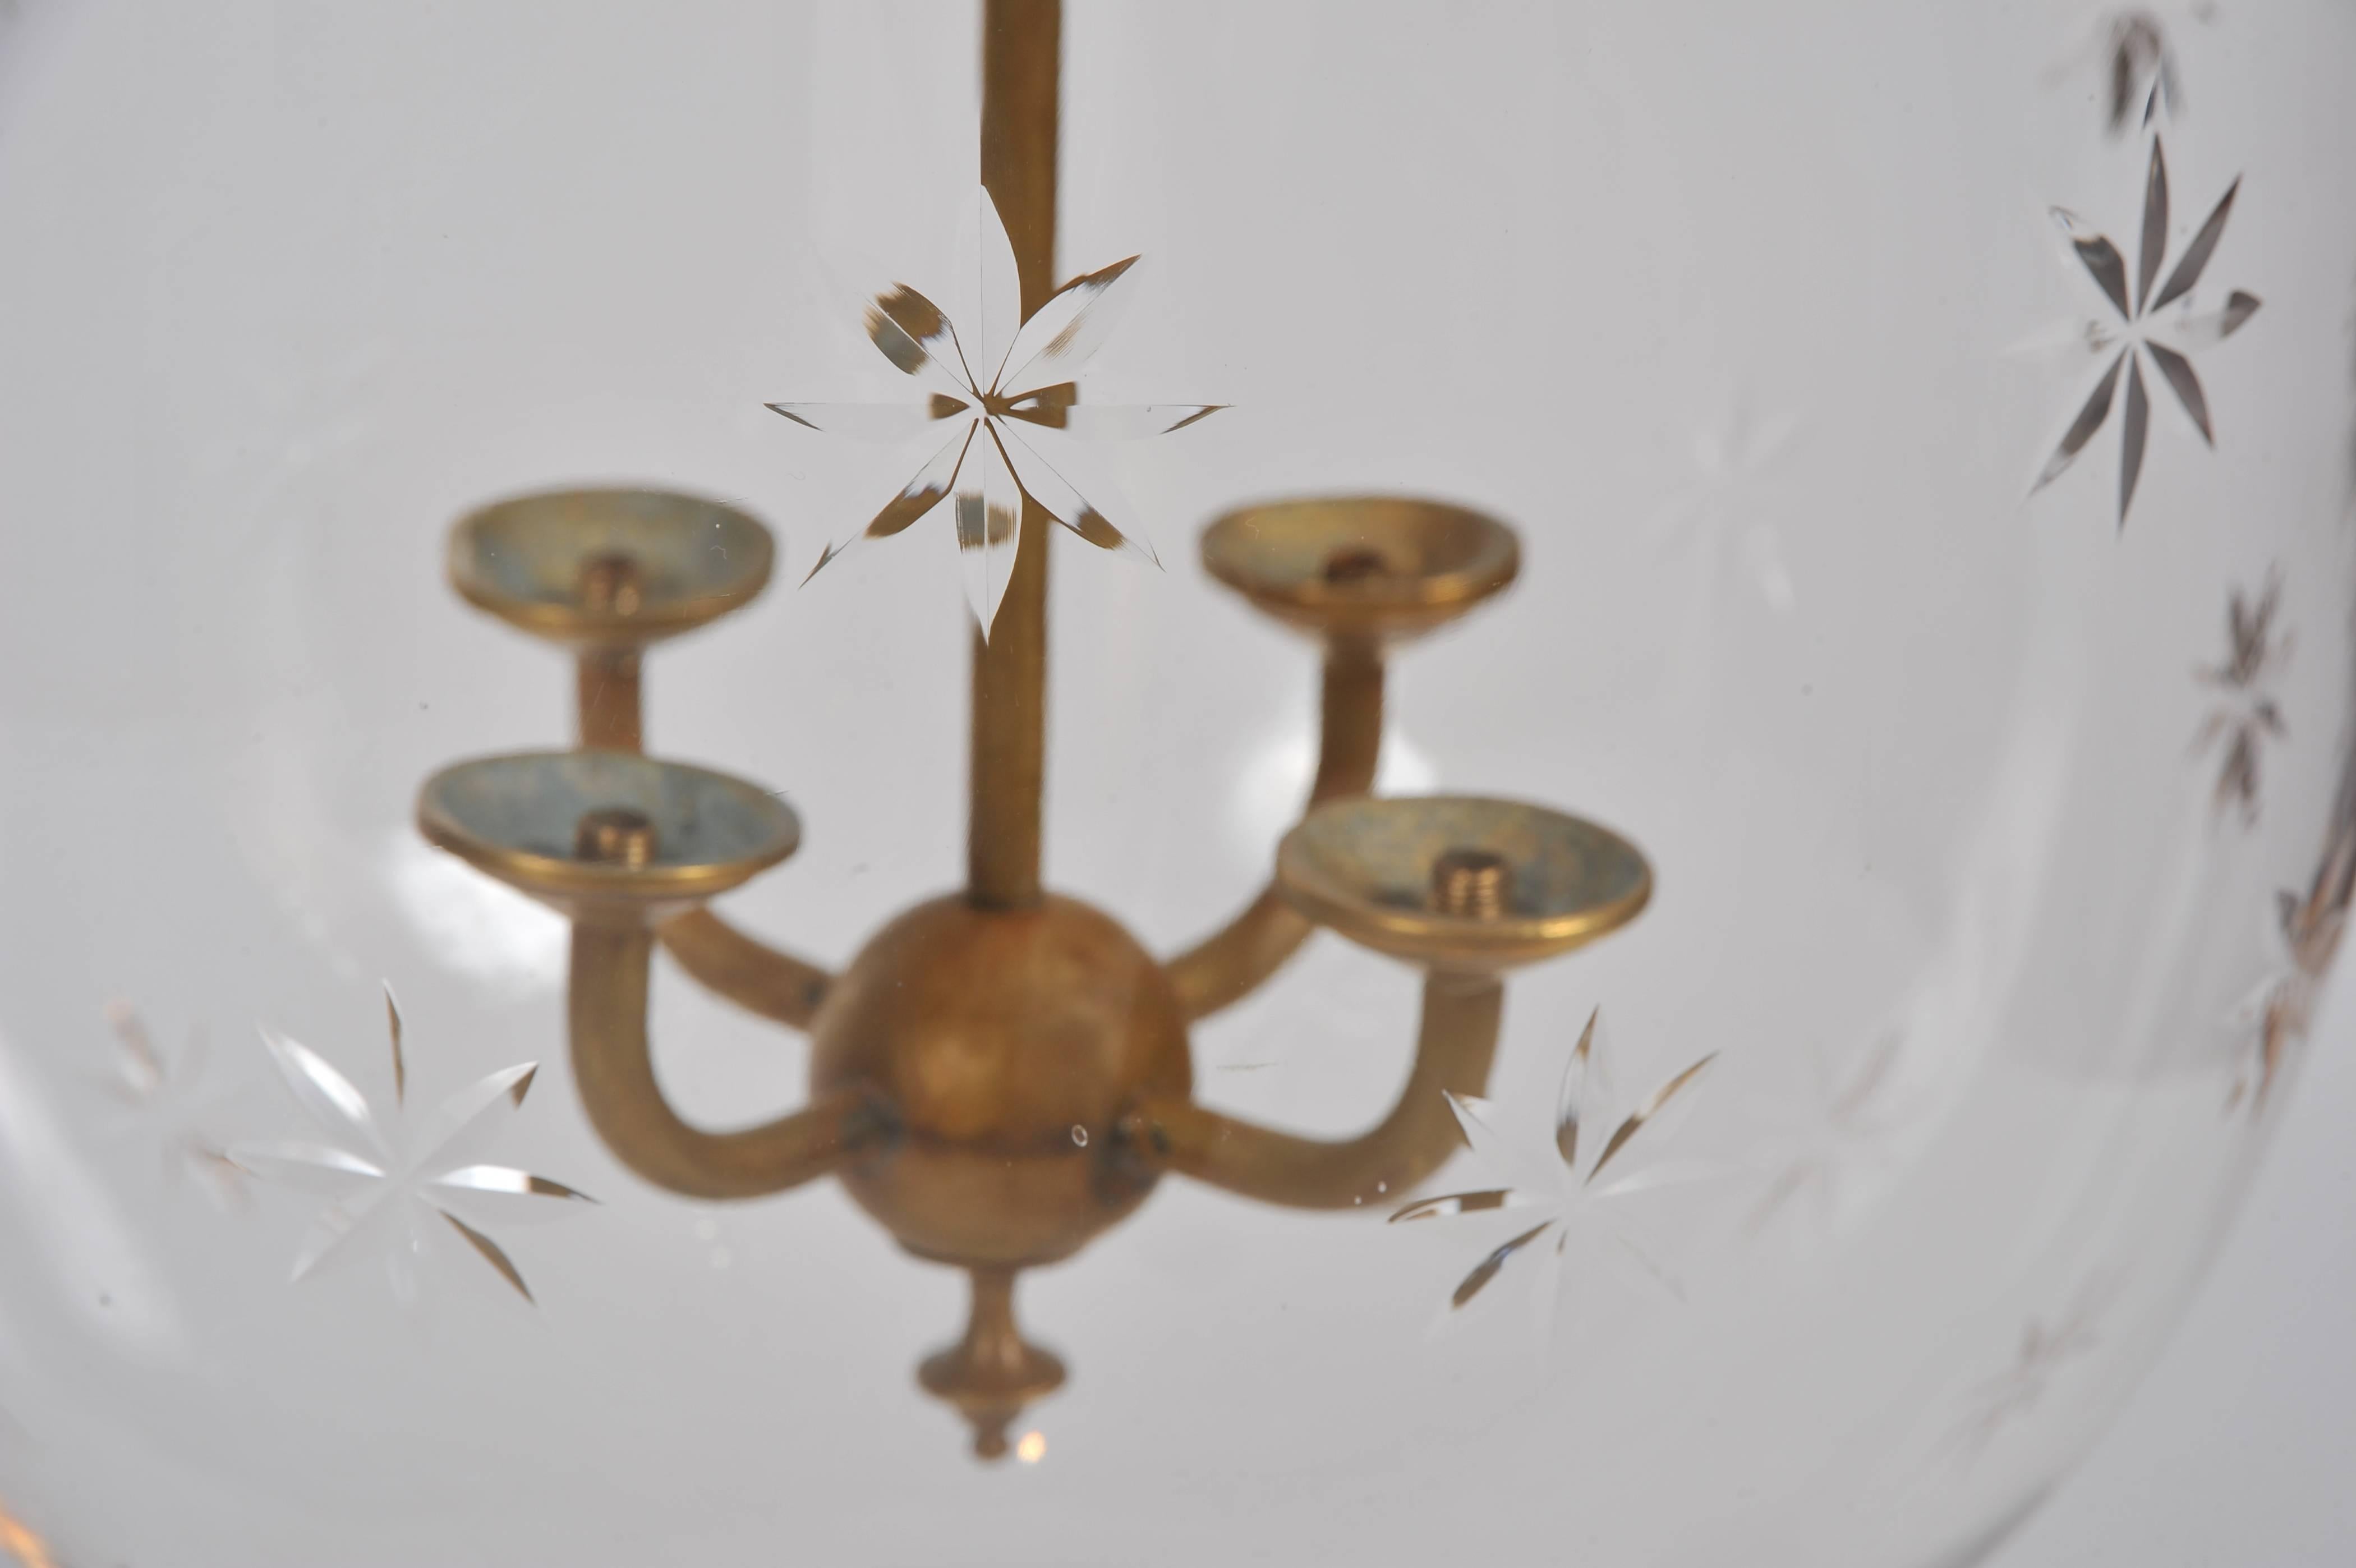 European Large Glass Star Design Storm Lantern with Brass Fittings